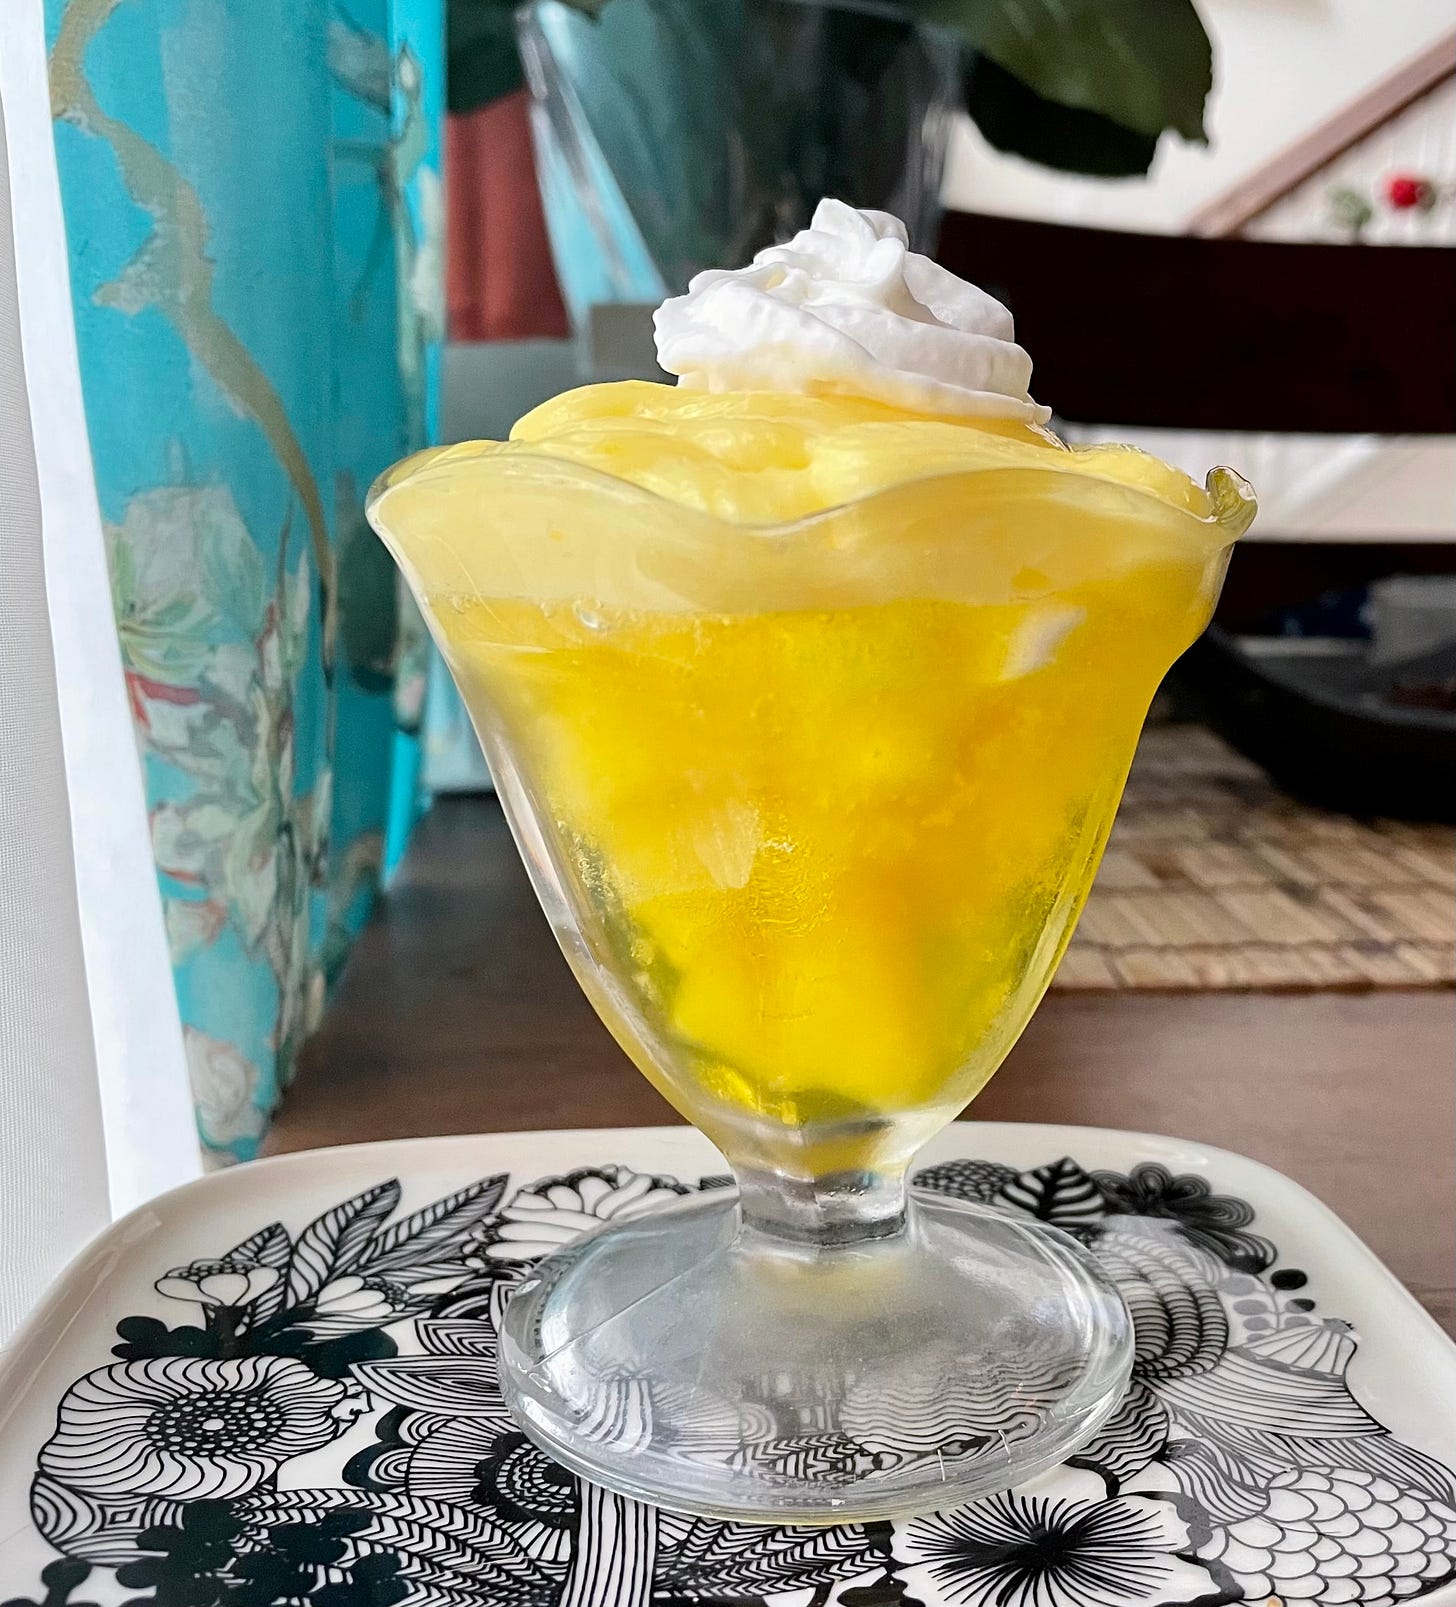 A clear glass sundae dish filled with yellow gelatin studded with hazy yellow fruits and topped with pale lemon pudding, and whipped cream